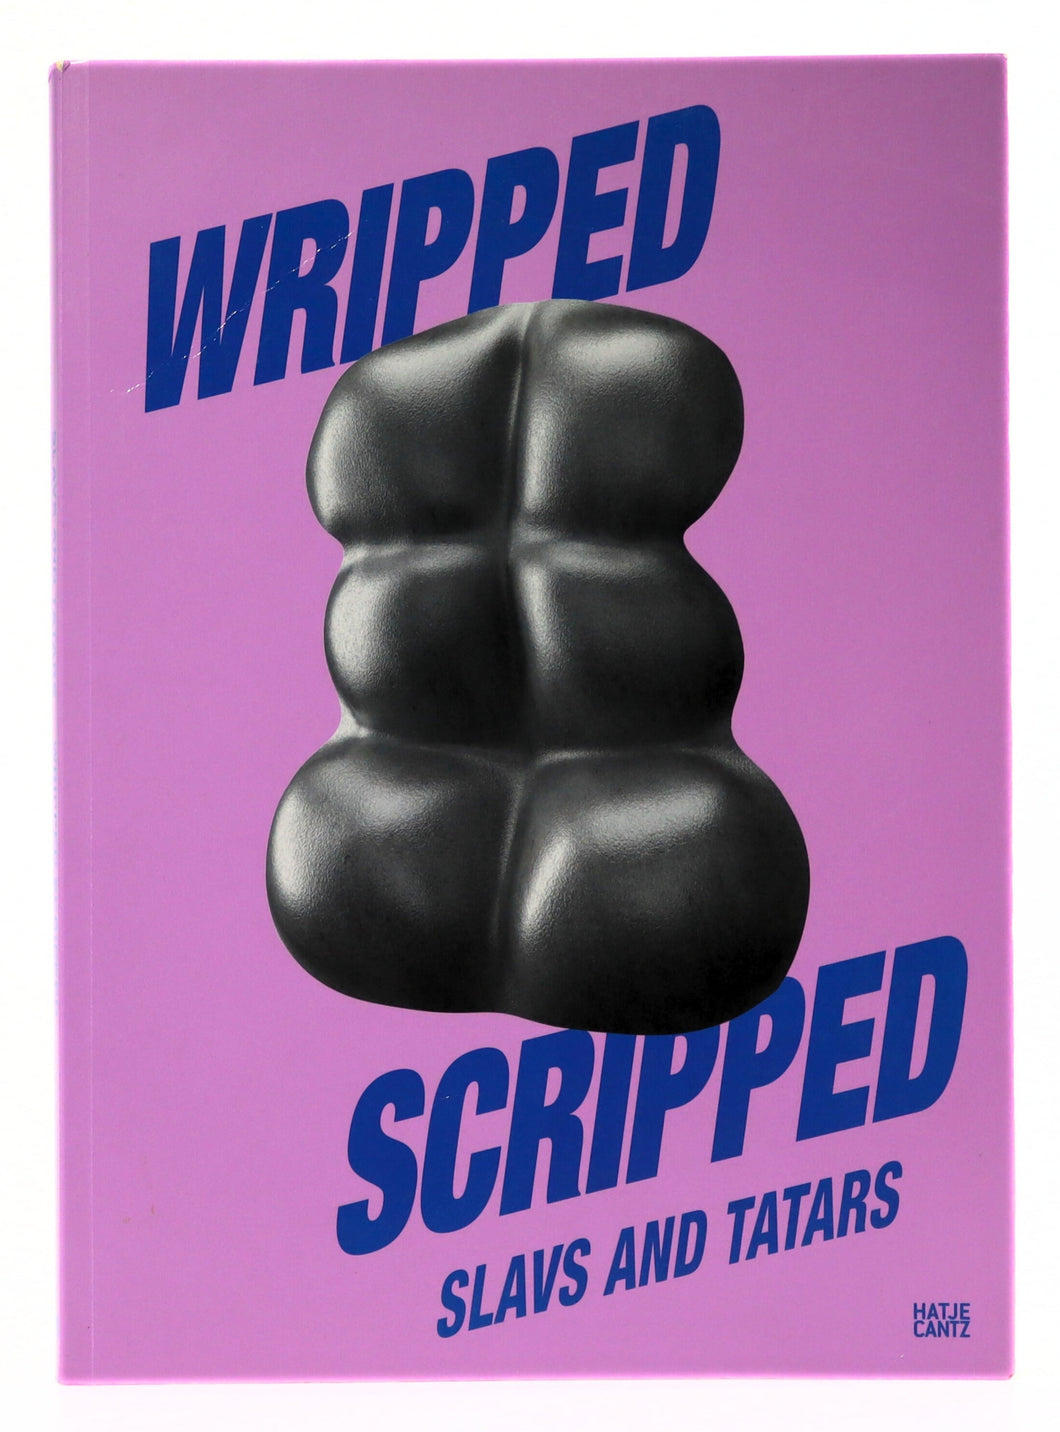 Slavs and Tatars, Wripped Scripped